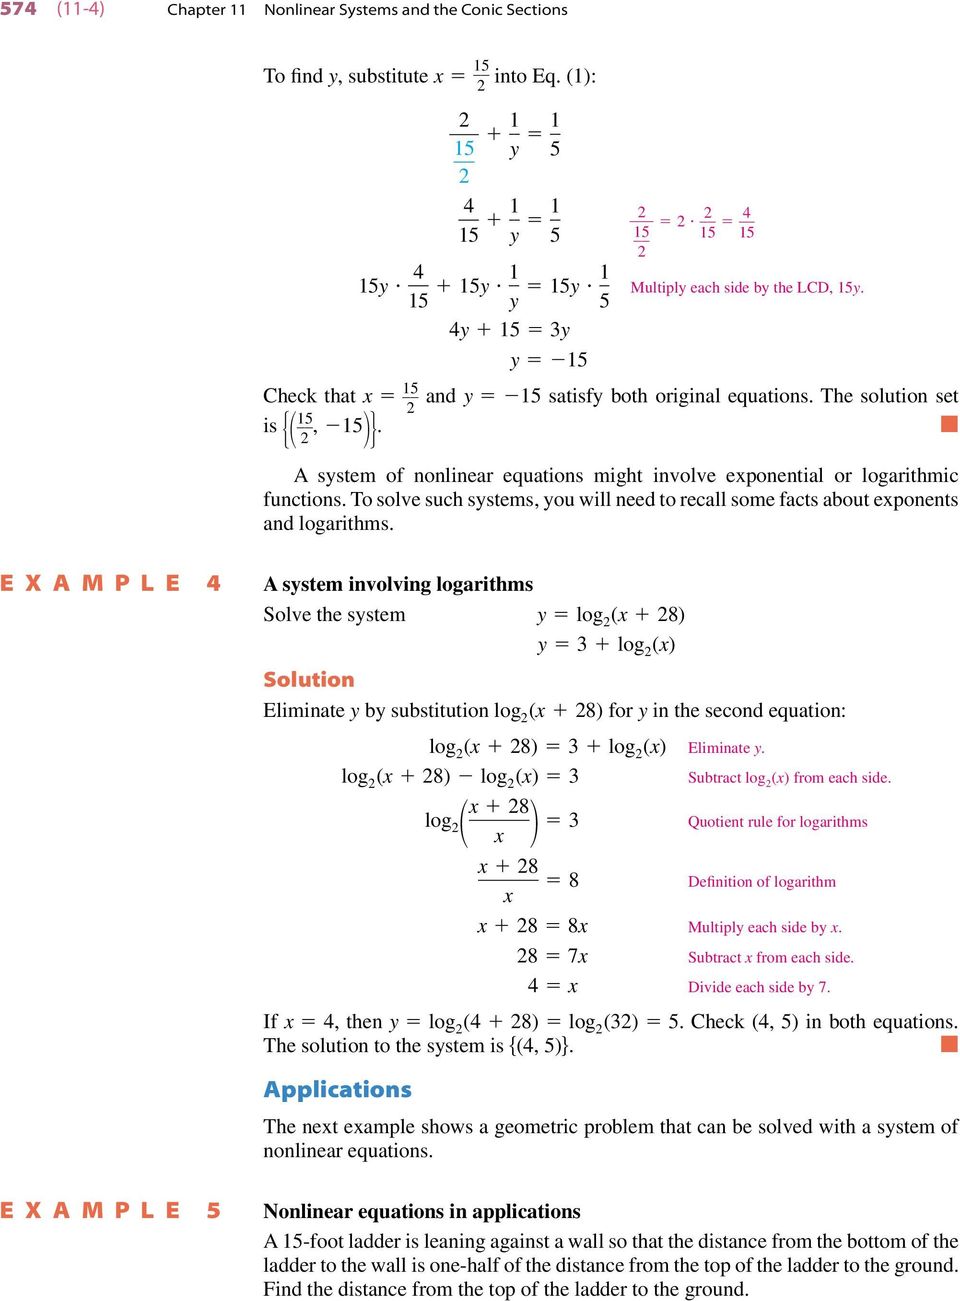 To solve such systems, you will need to recall some facts about exponents and logarithms.